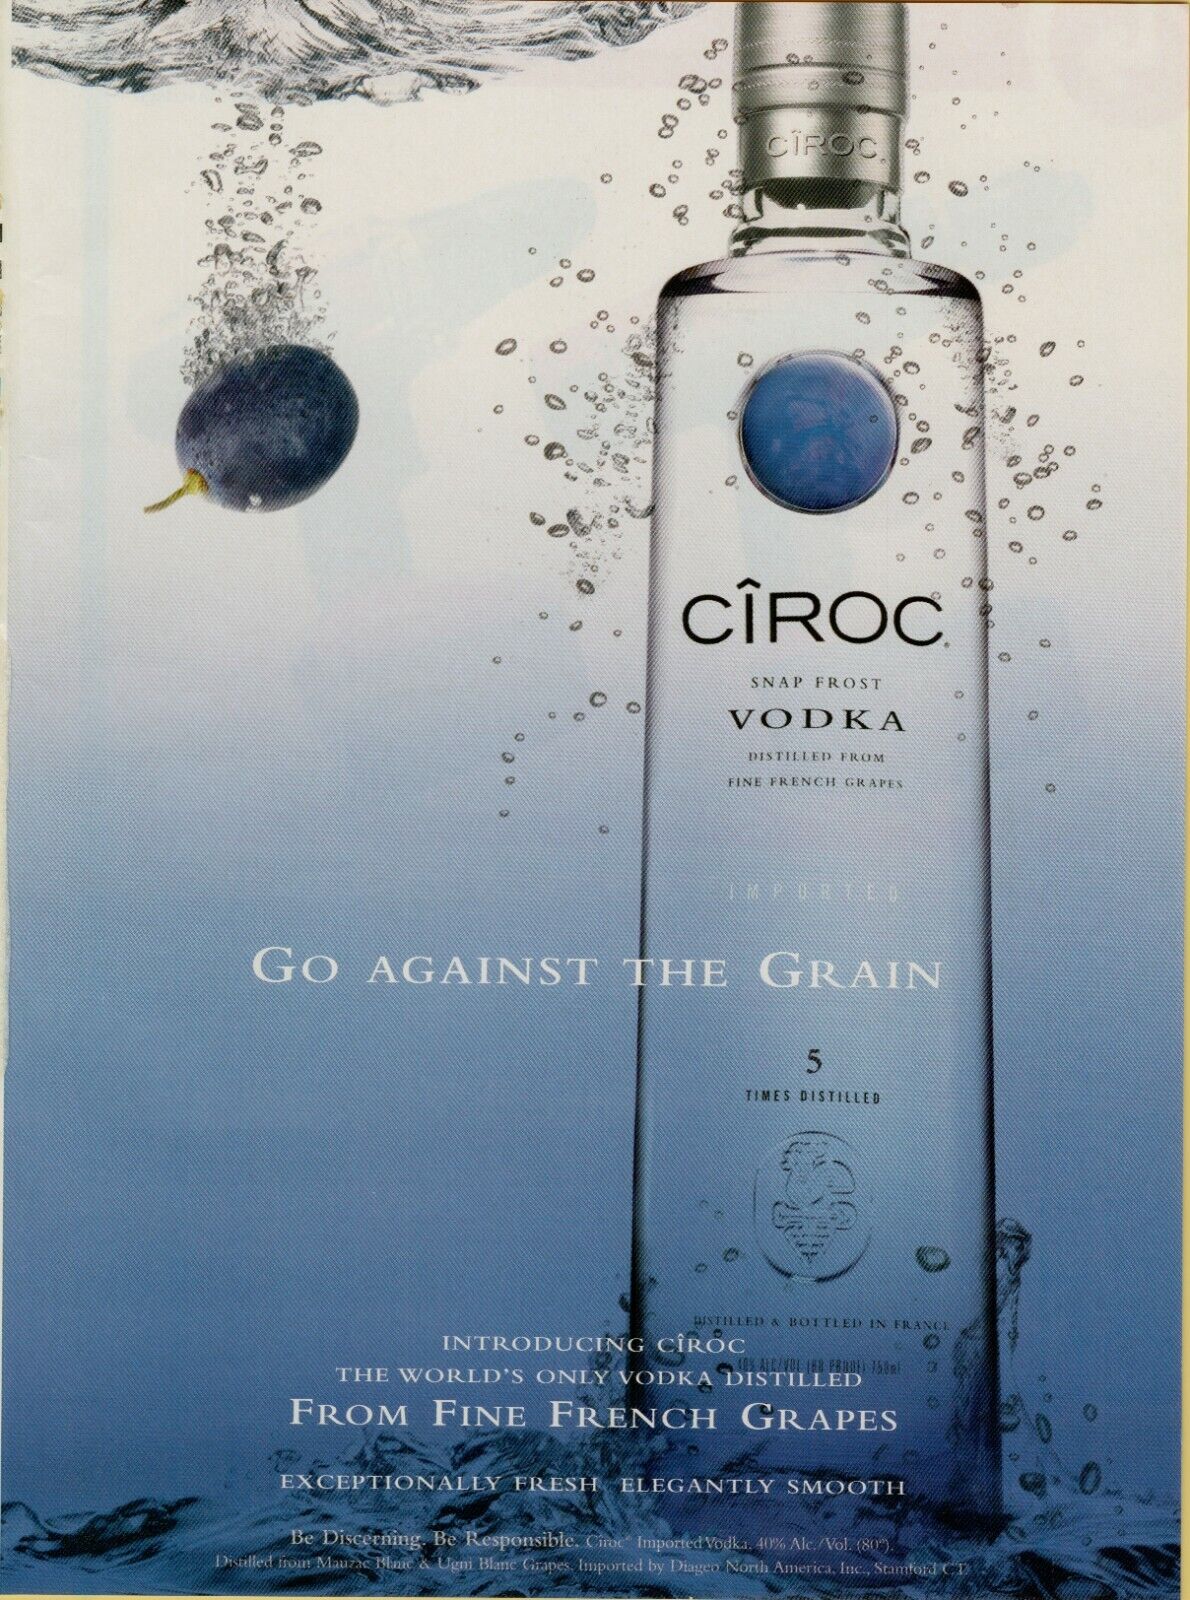 2004 Ciroc Snap Frost Vodka Fine French Grapes Underwater Blue Vintage Print Ad